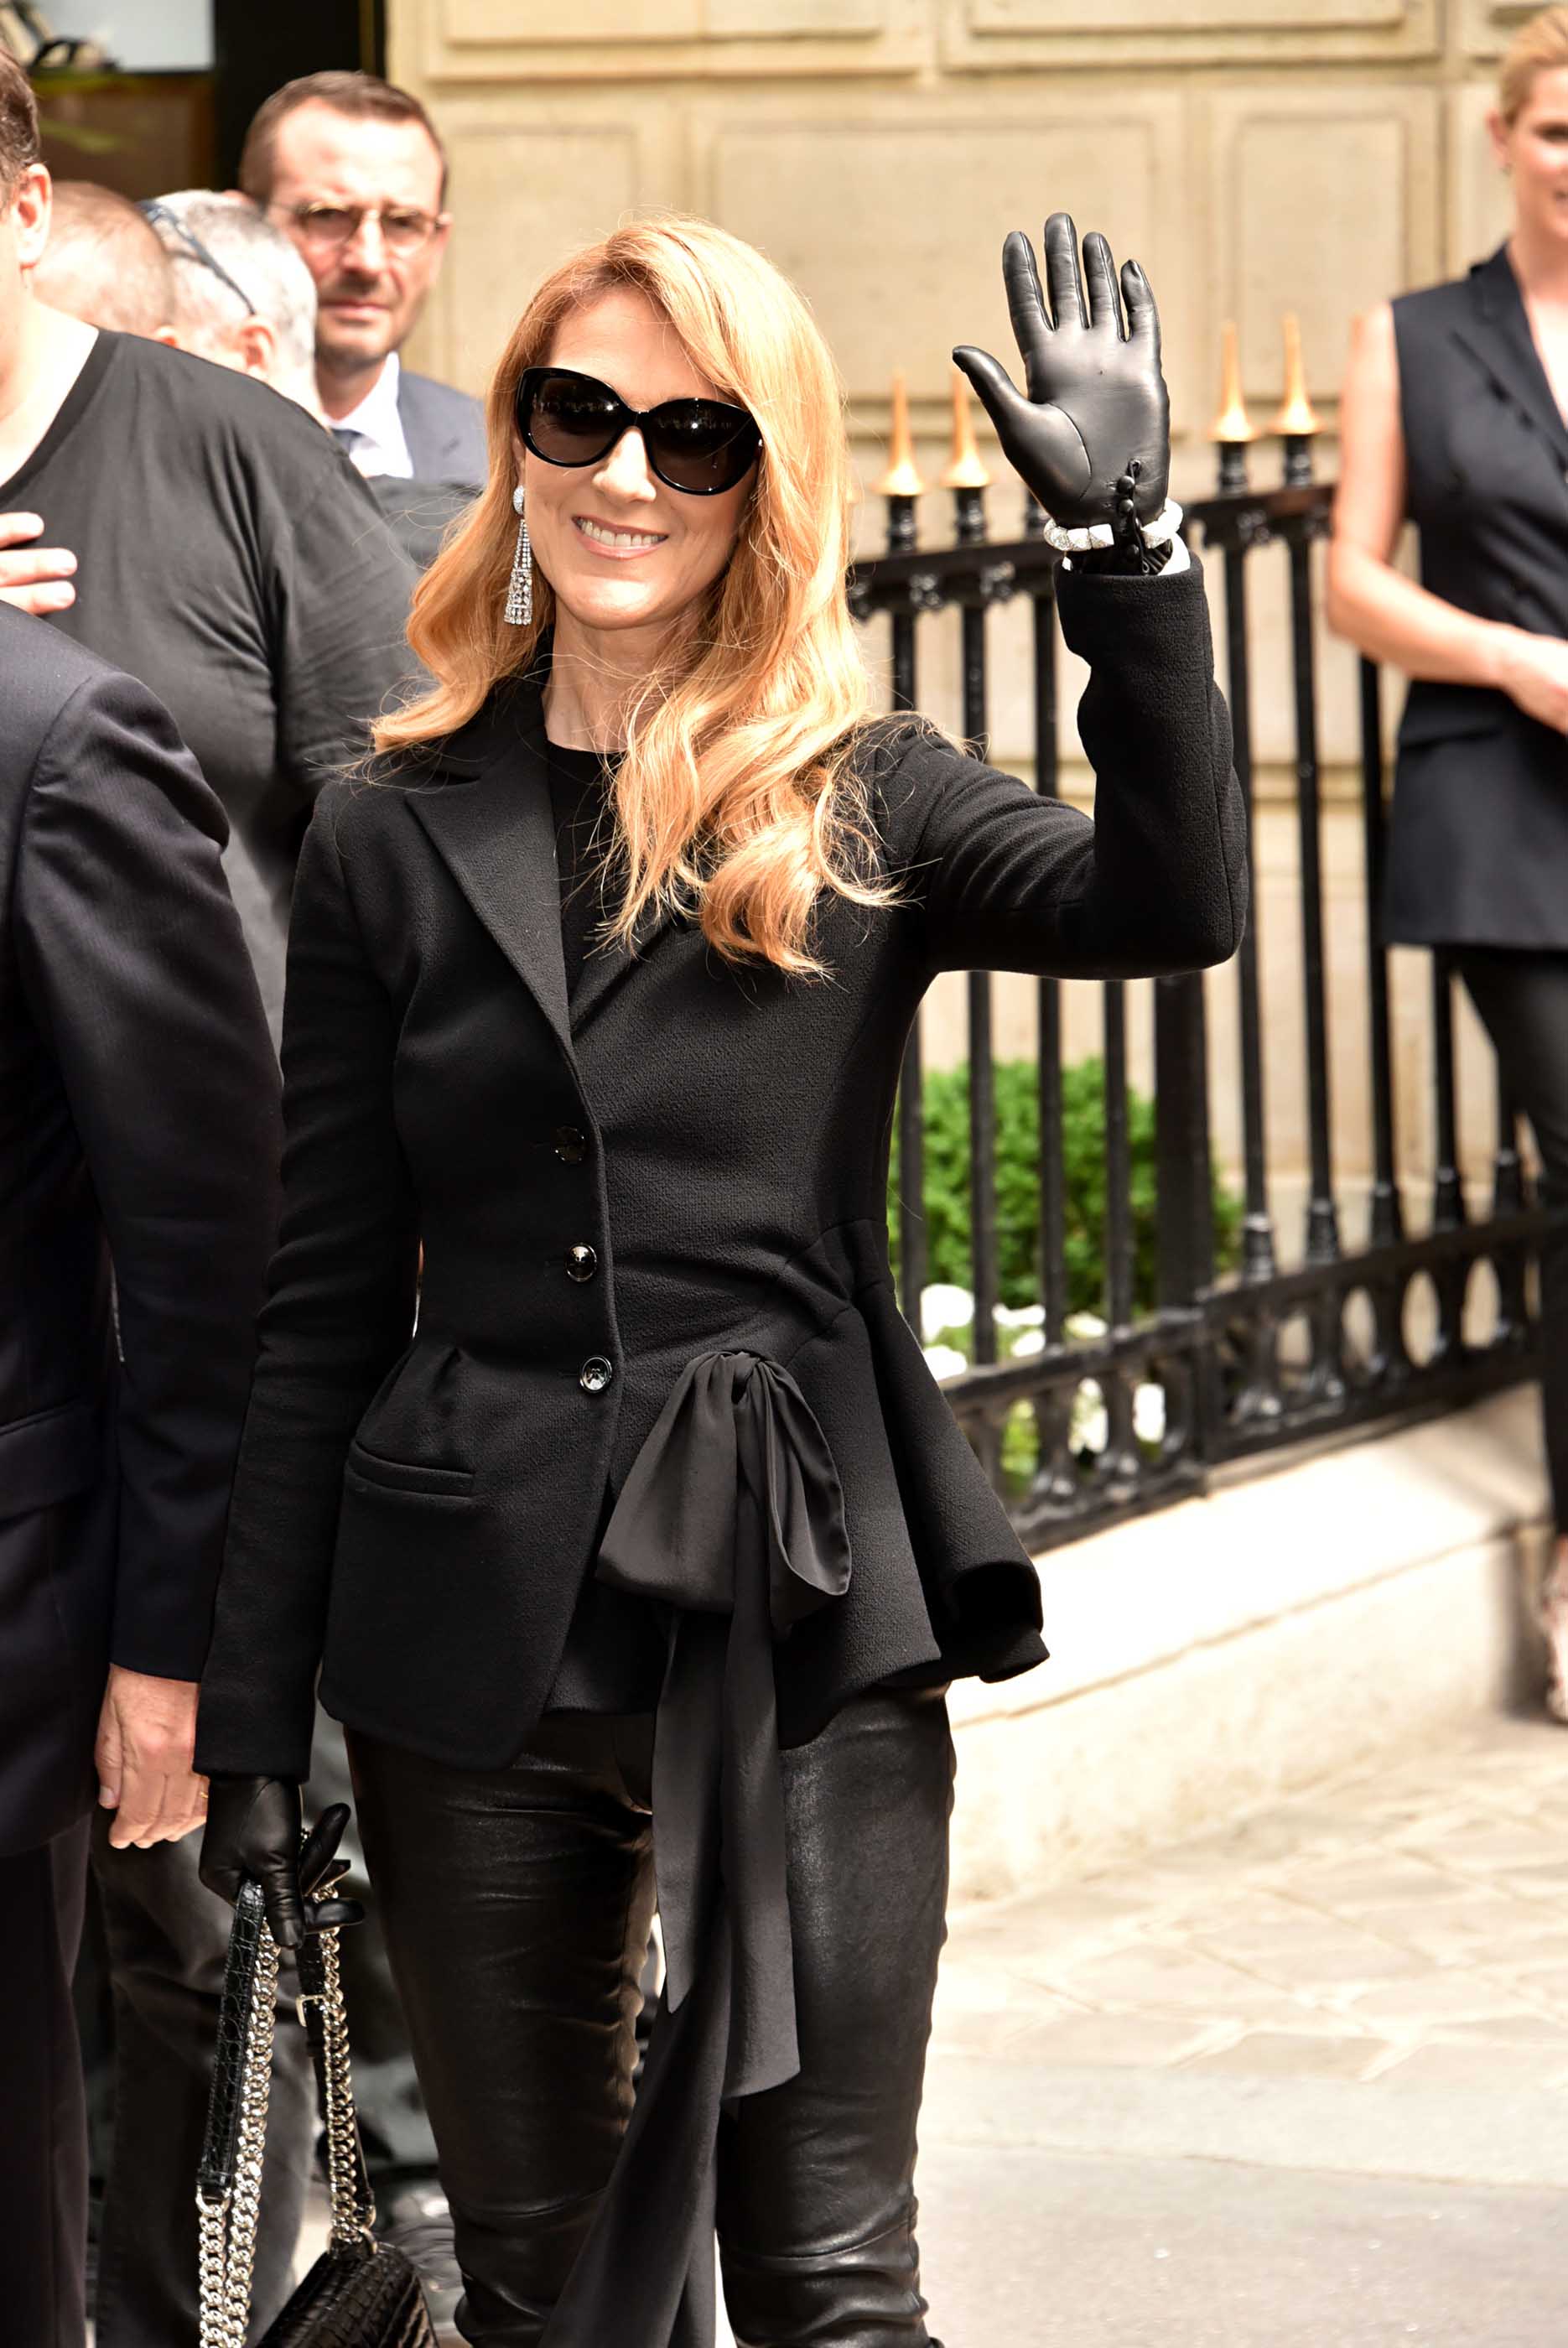 Celine Dion attends the Christian Dior Haute Couture Fall/Winter 2016/2017 show